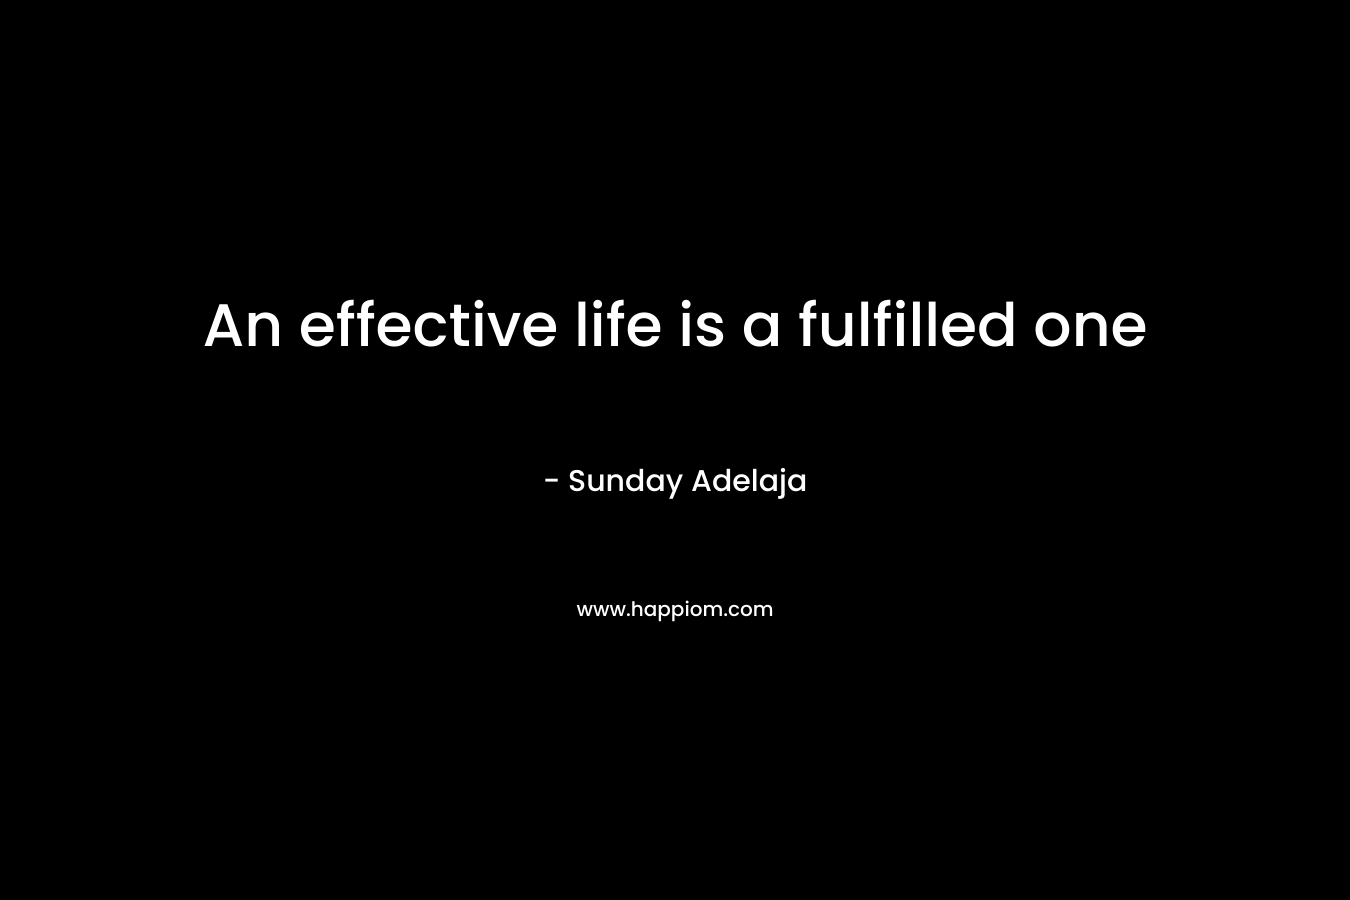 An effective life is a fulfilled one